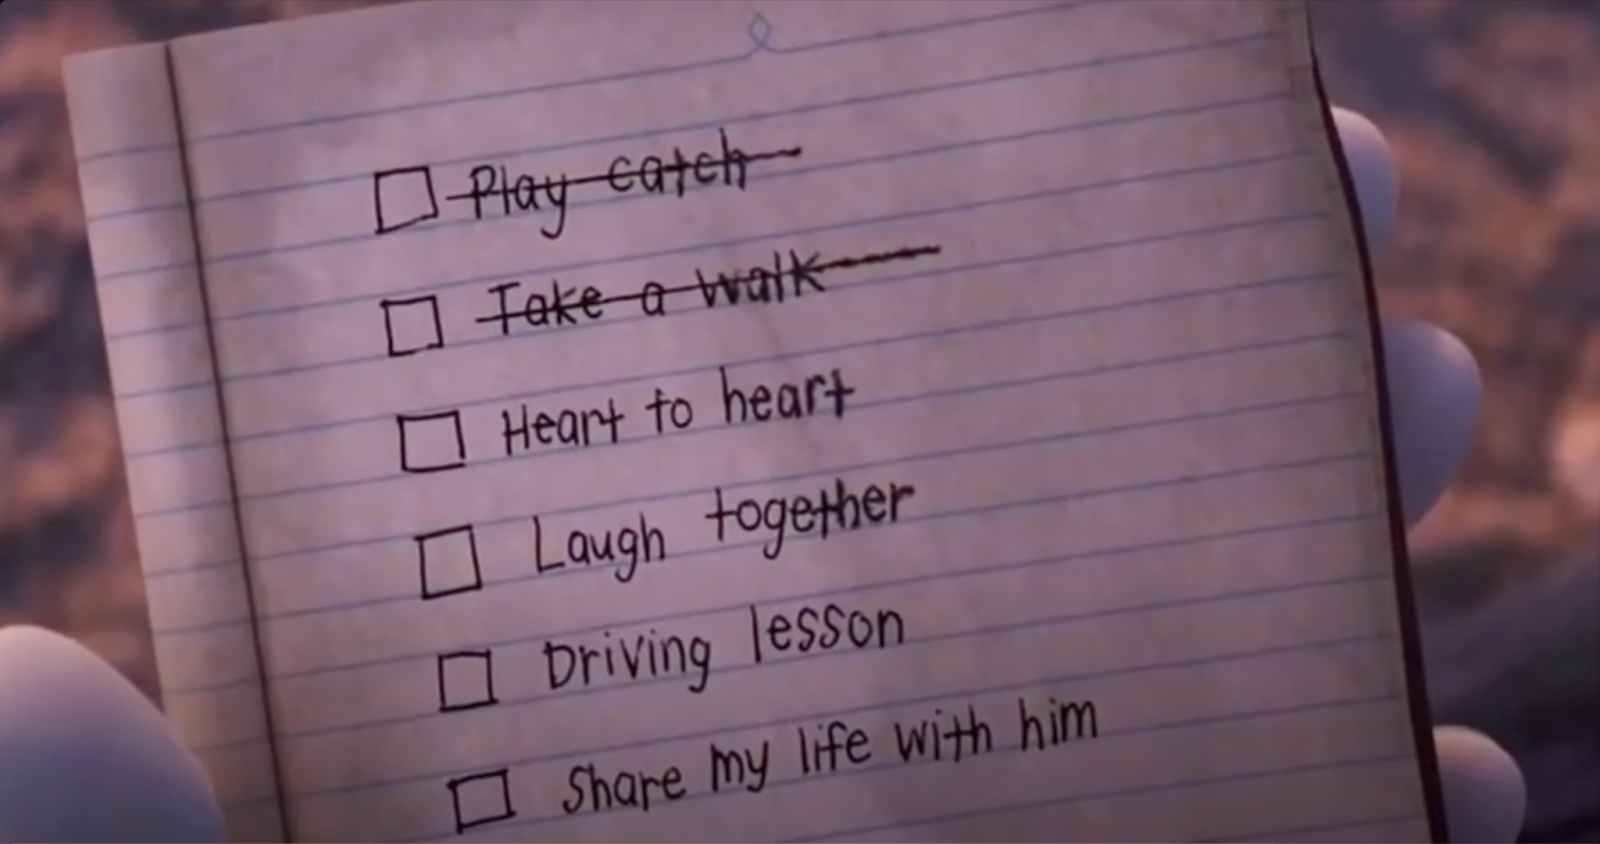 Ian Lightfoot from Onward looks at the list of things he wants to do with this dad